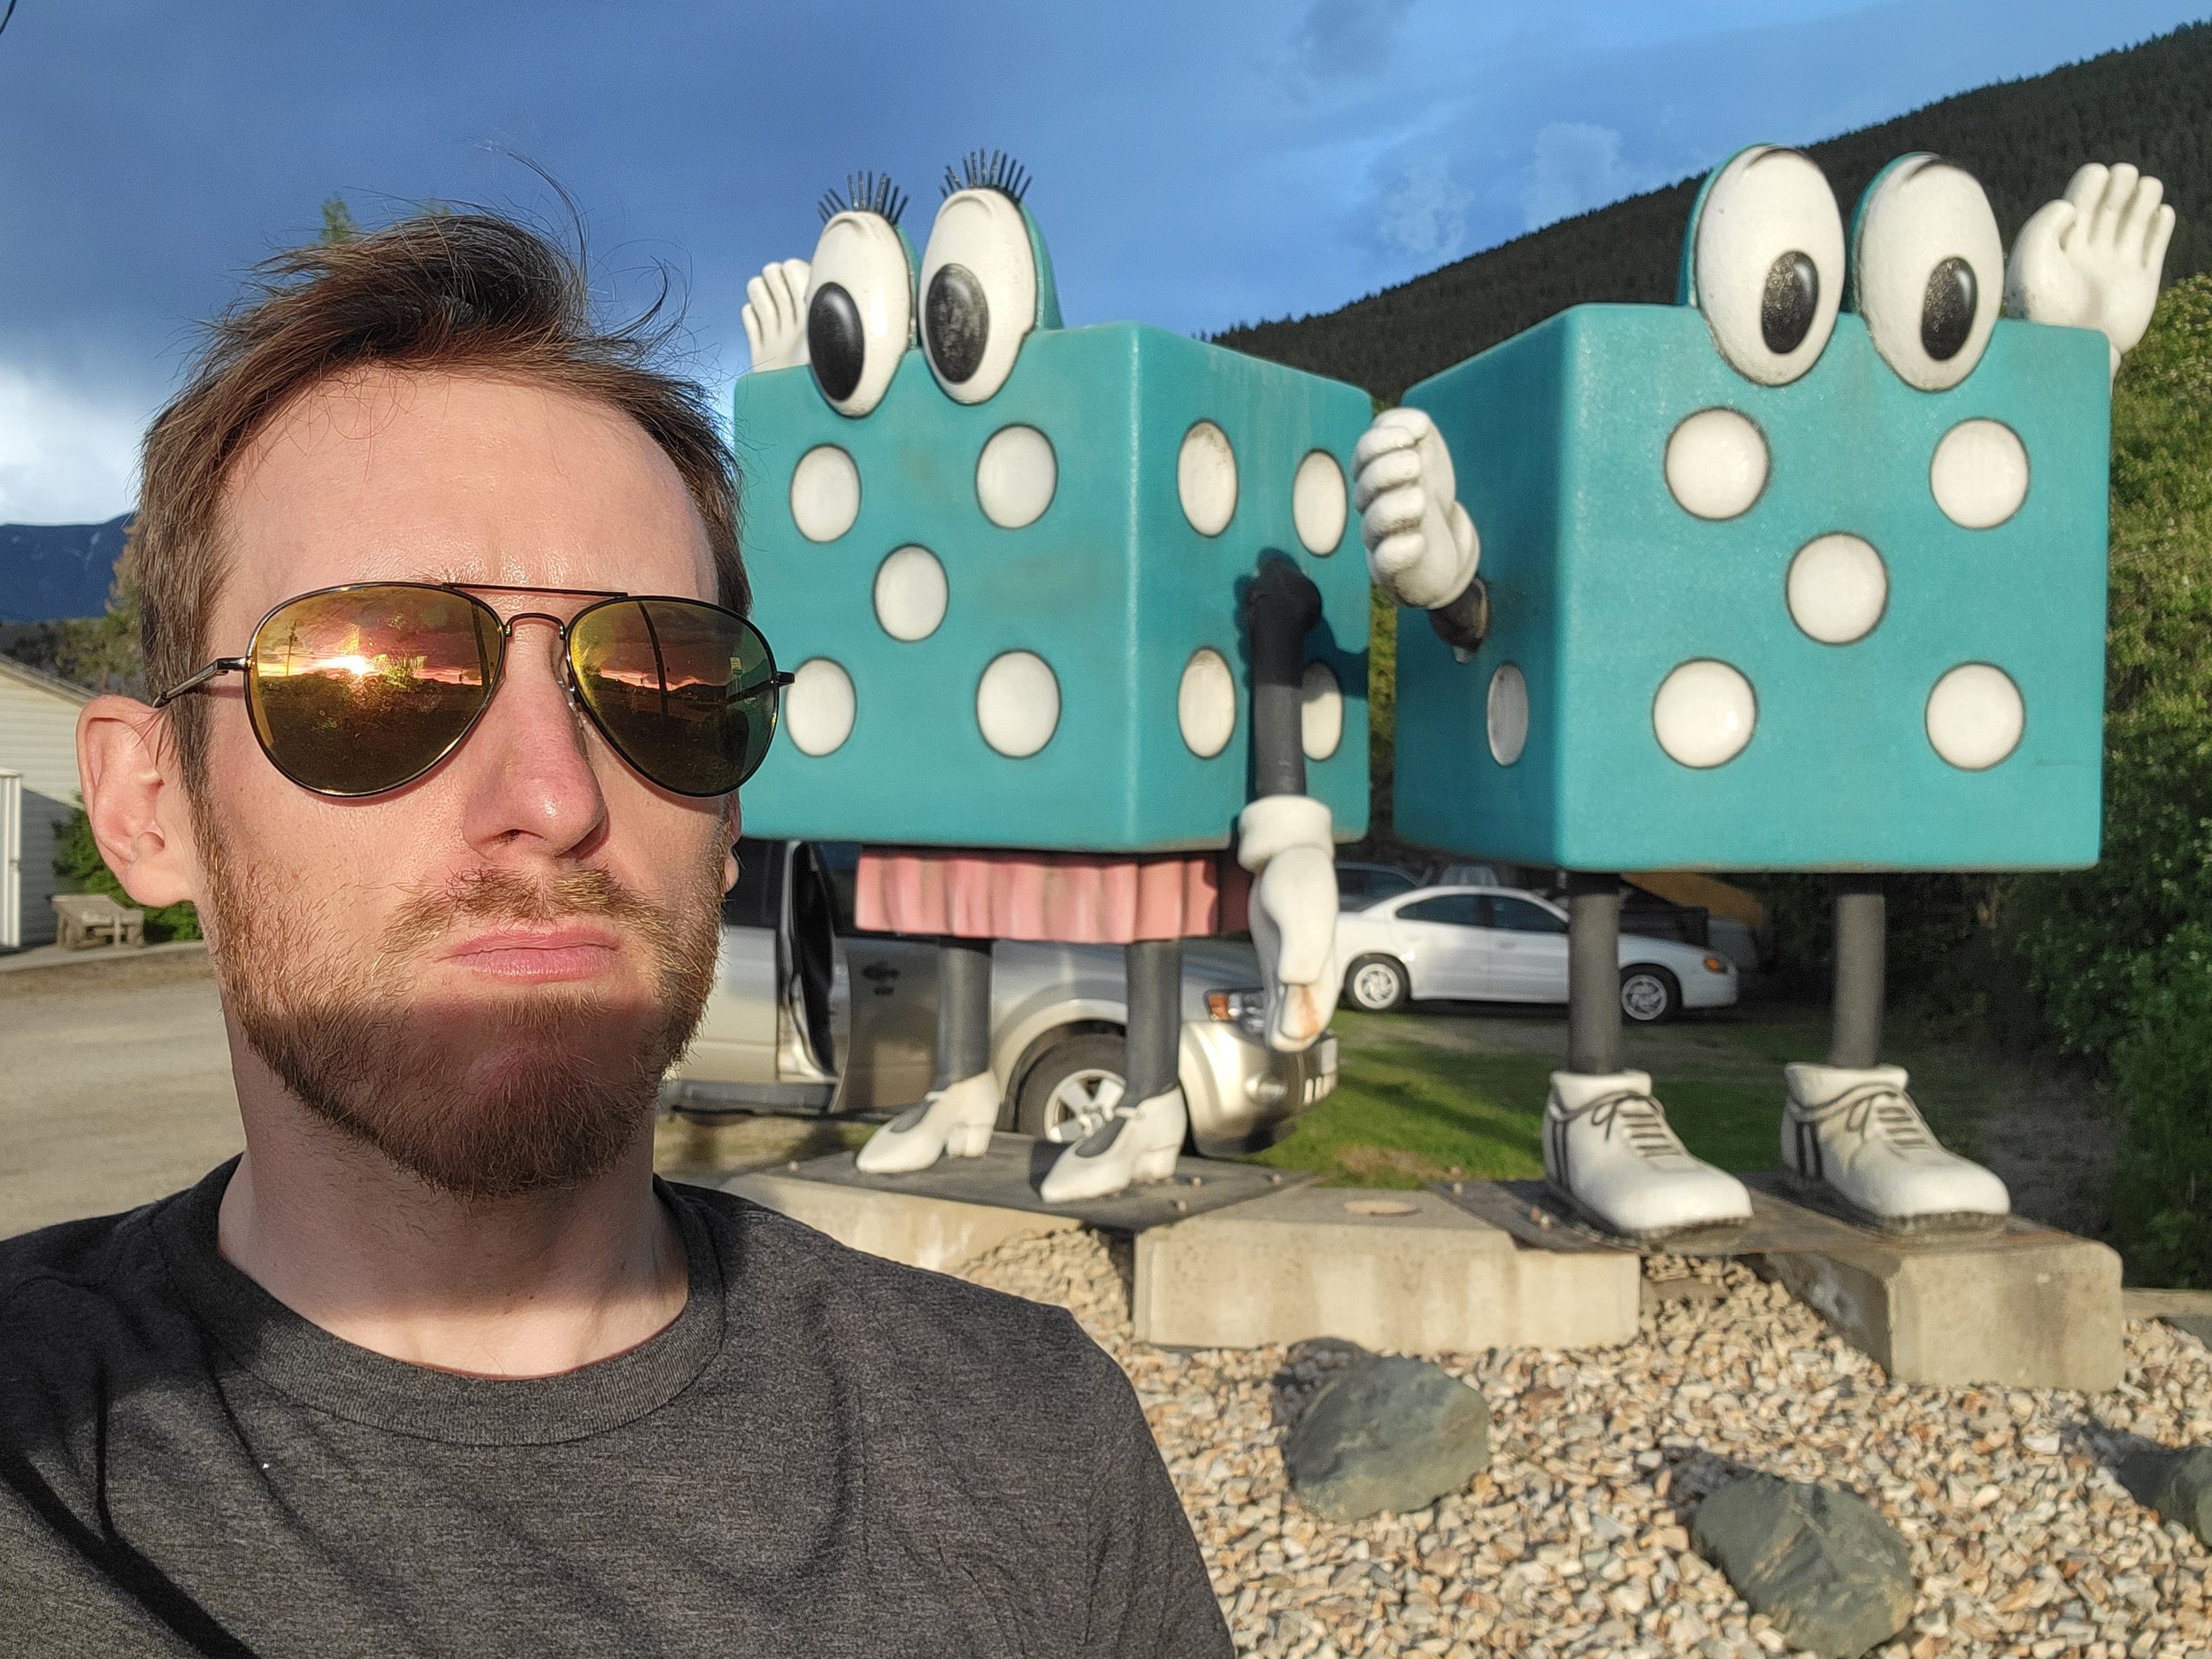 Large "his and her's" dice at an RV resort in town. Not the biggest anything but I'll take what I can get.